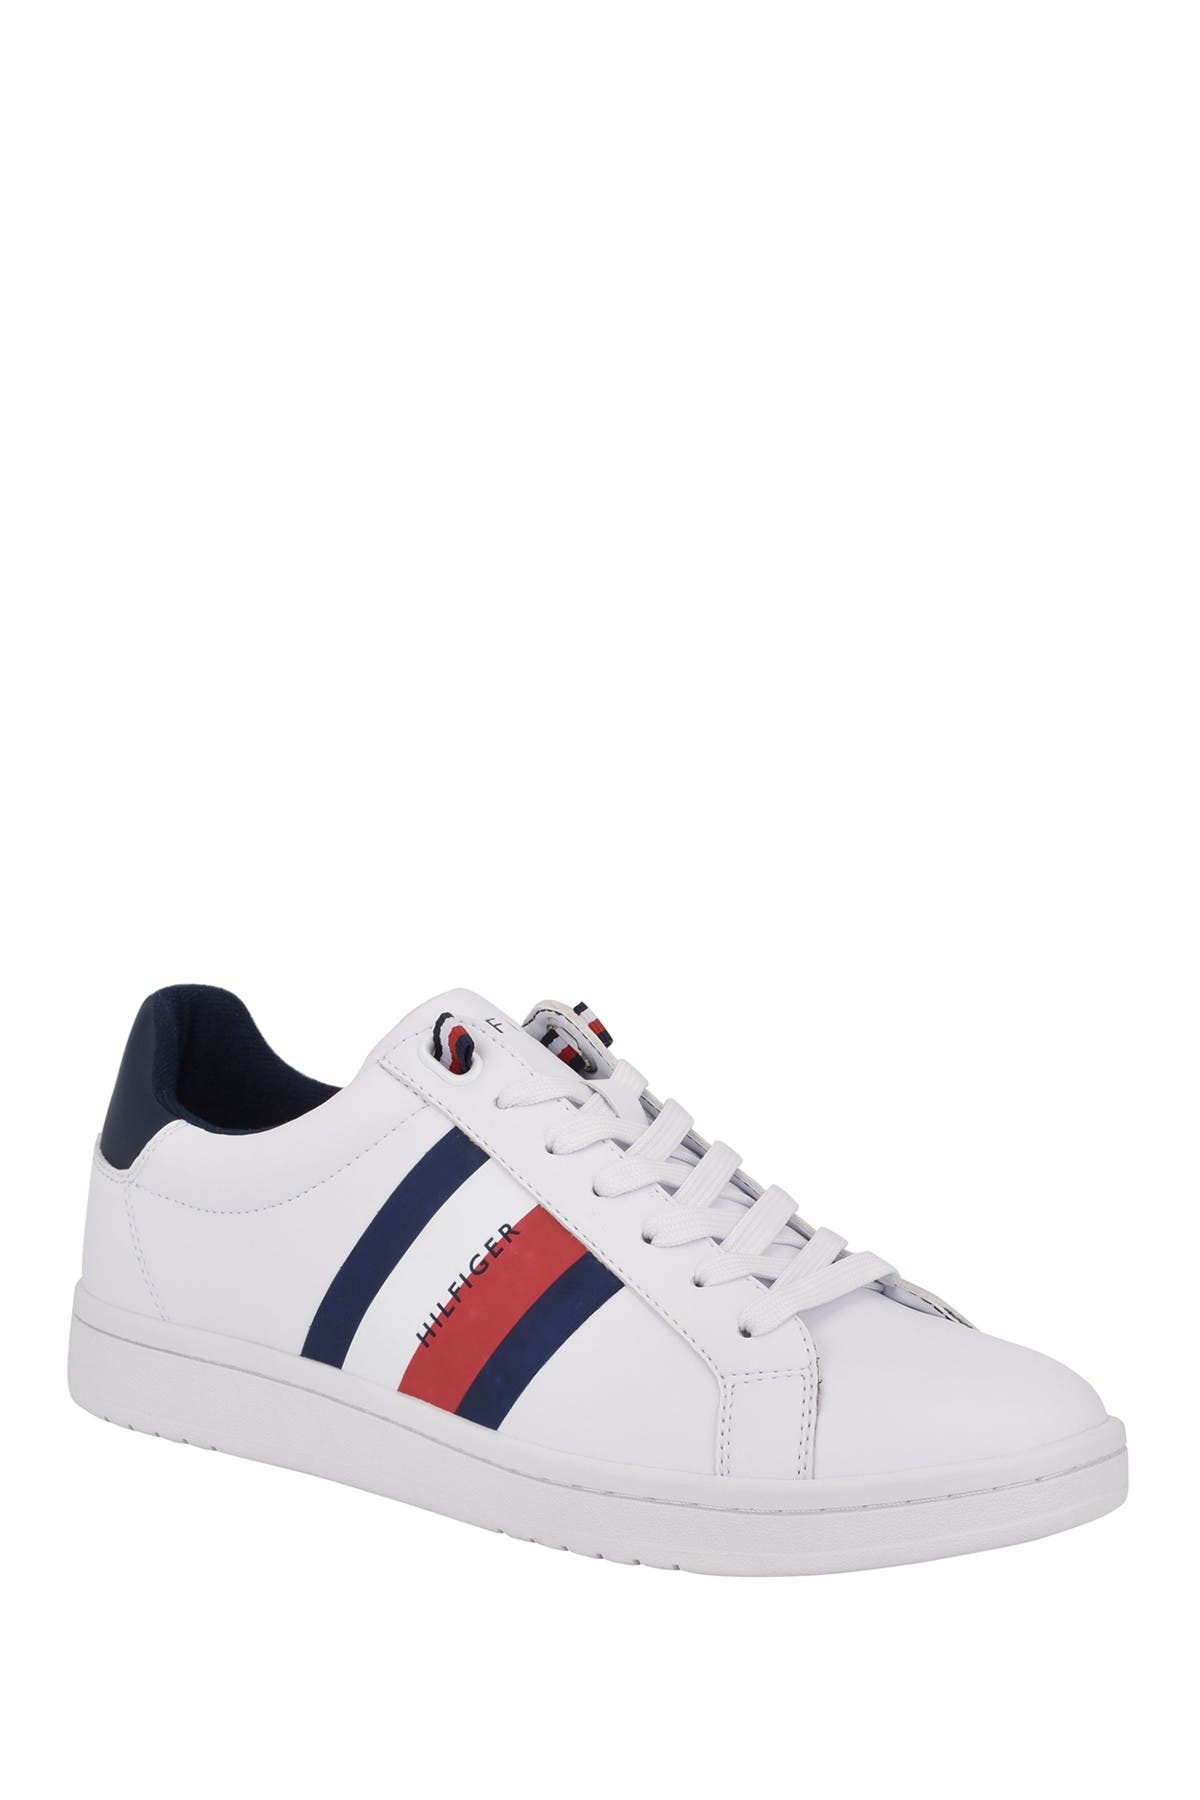 TOMMY HILFIGER LECTERN SIGNATURE SNEAKER,194652888465